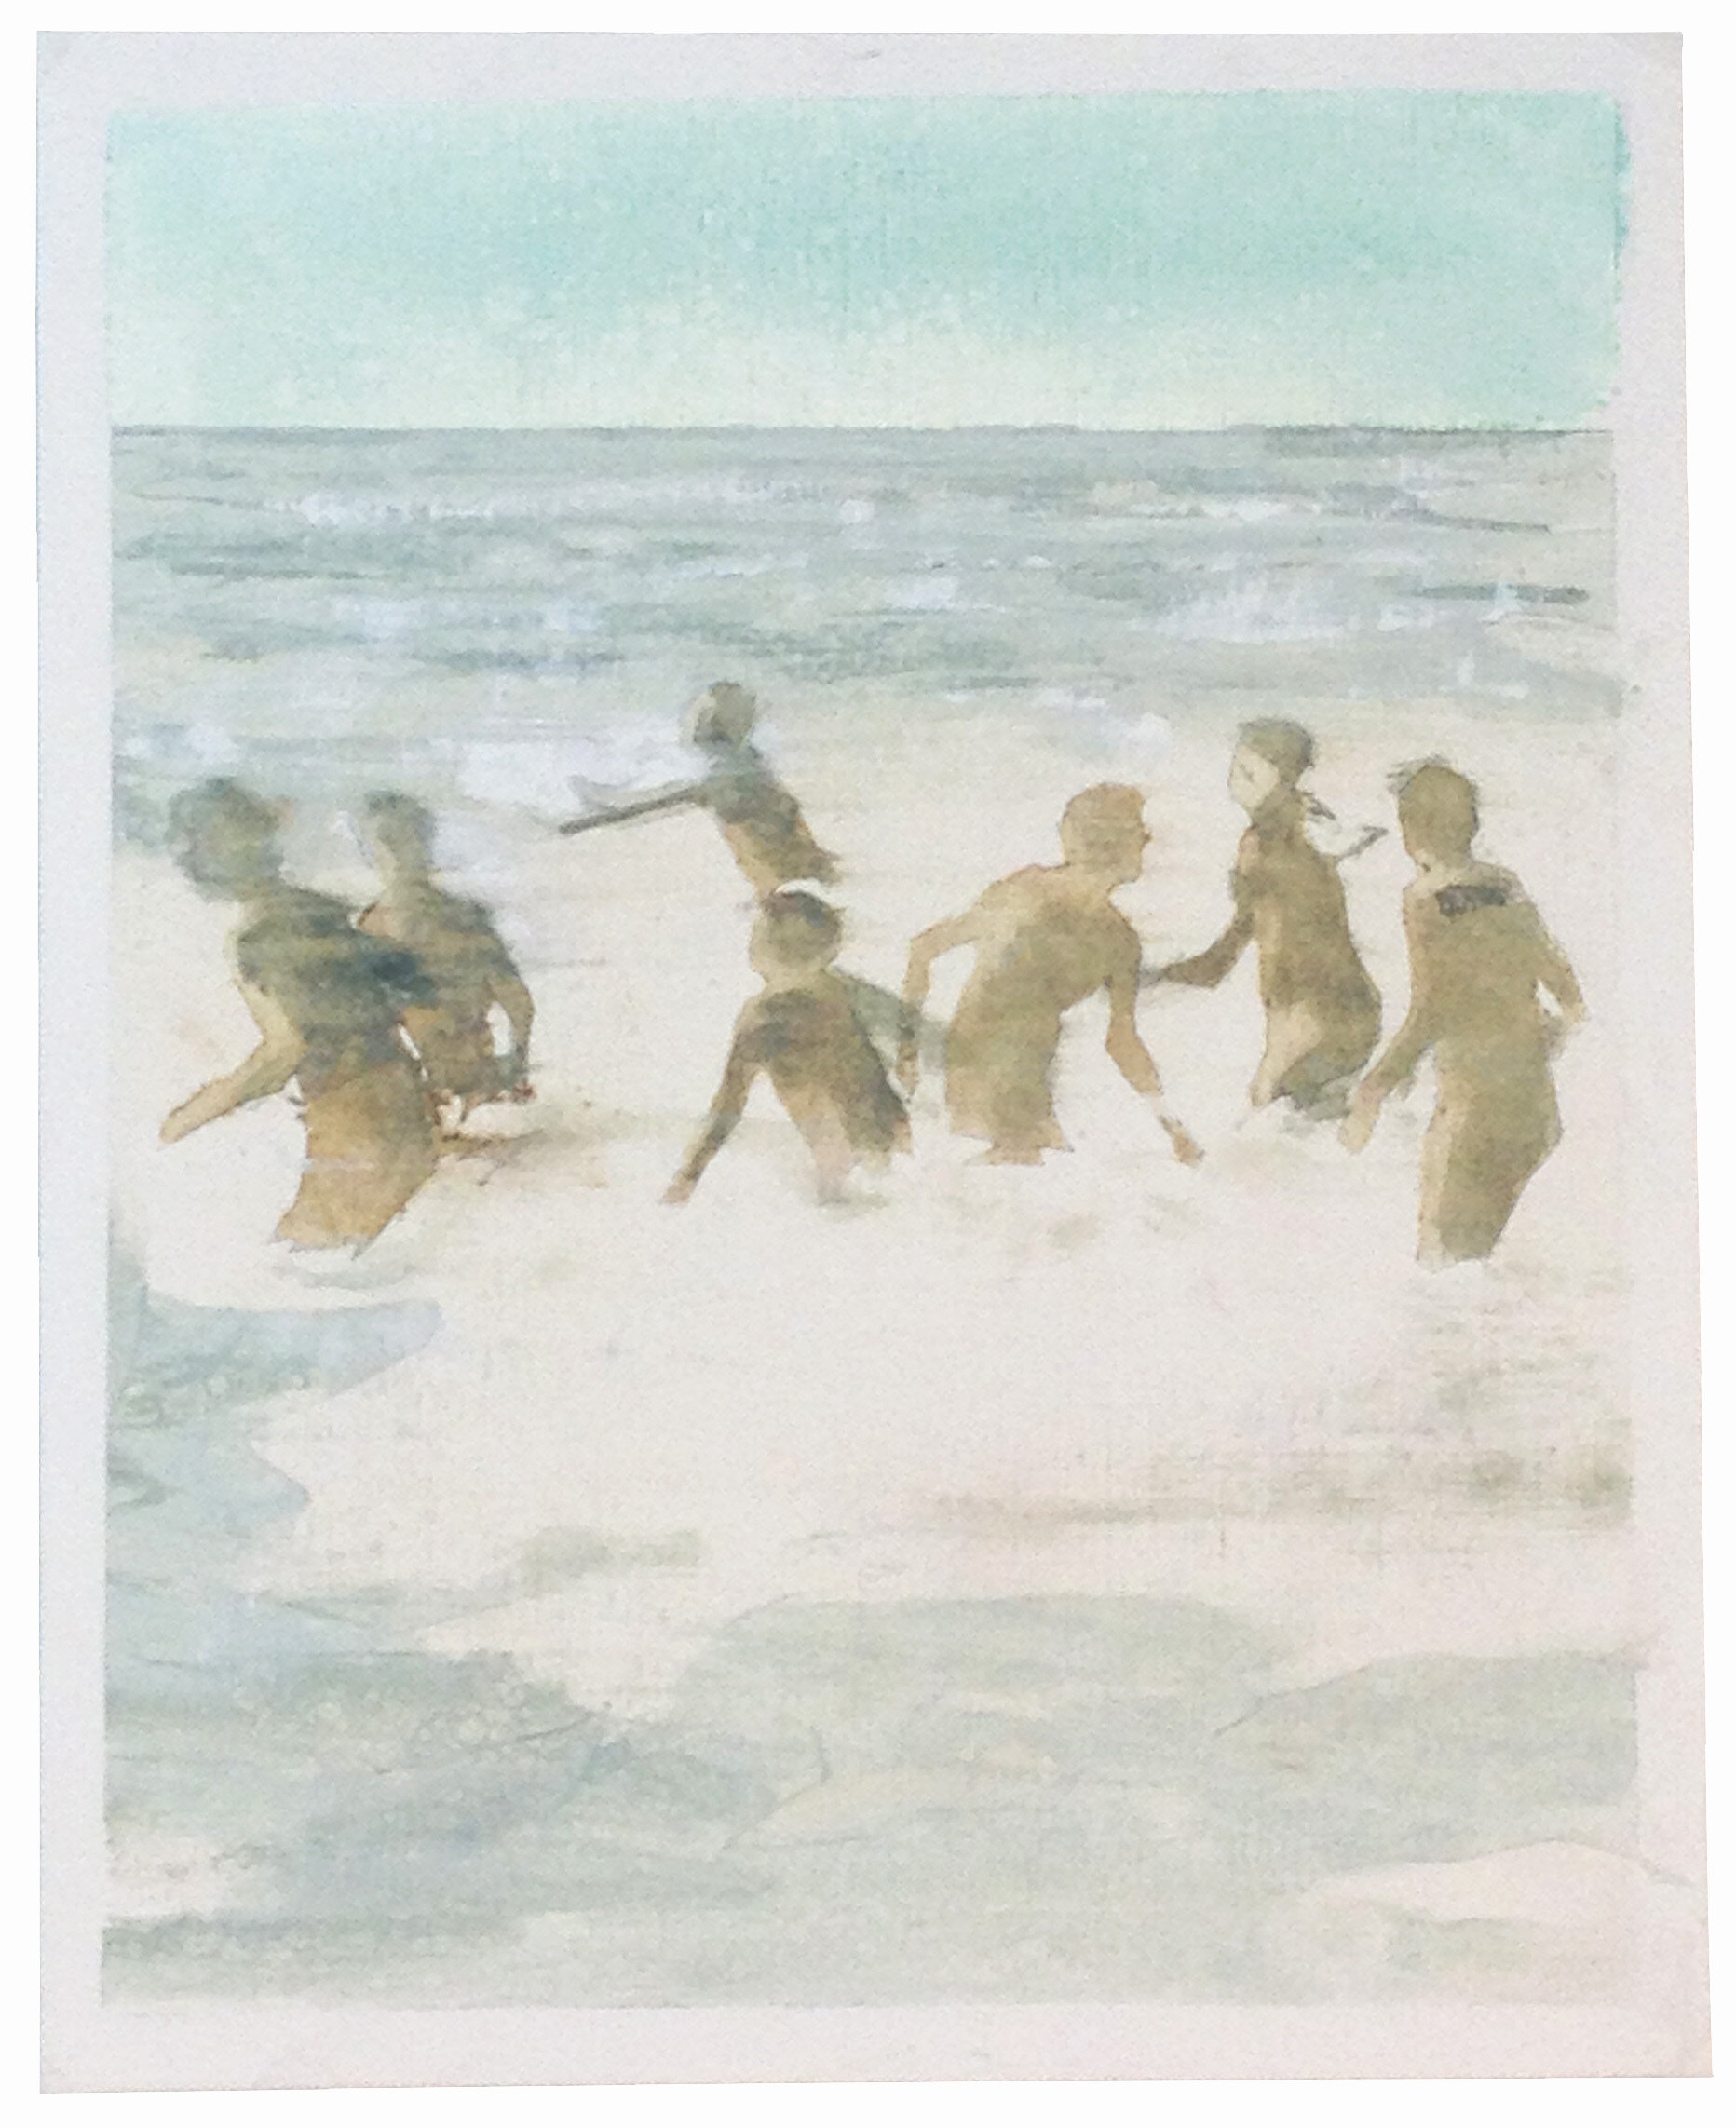  In The Surf (study) 13 x 10.5 inches Oil on paper 2014 